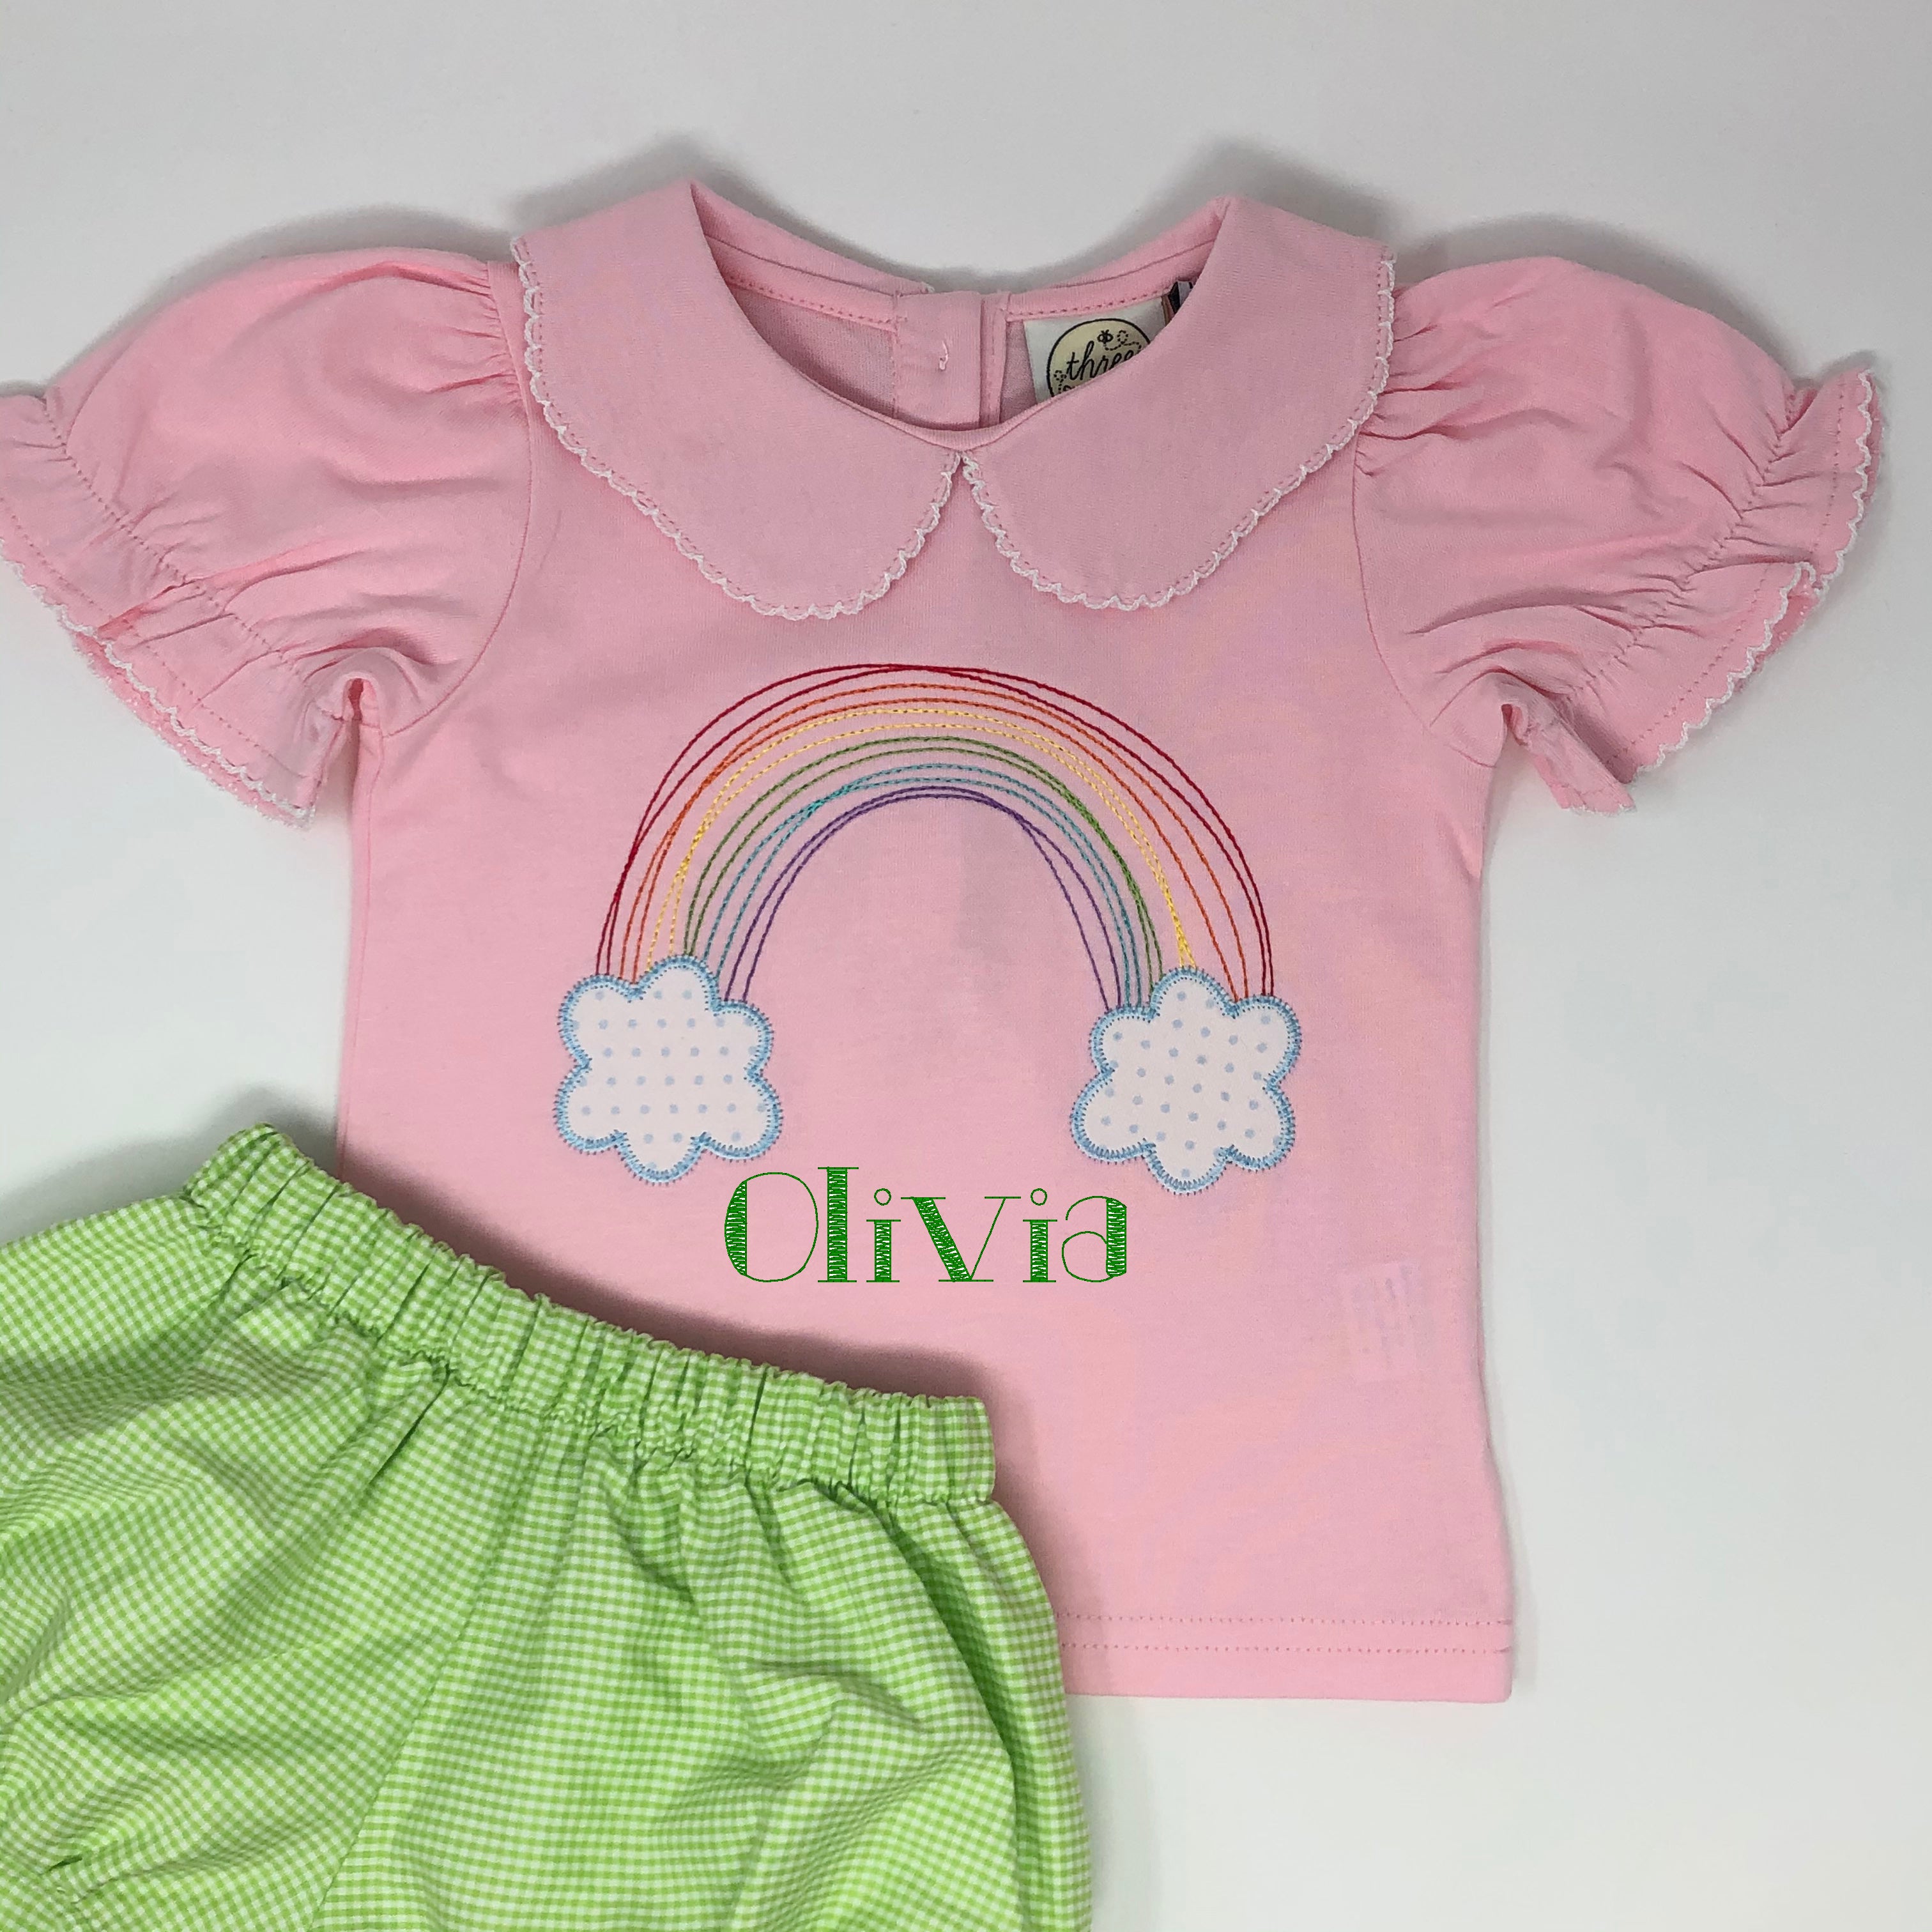 Over the Rainbow Girls Top